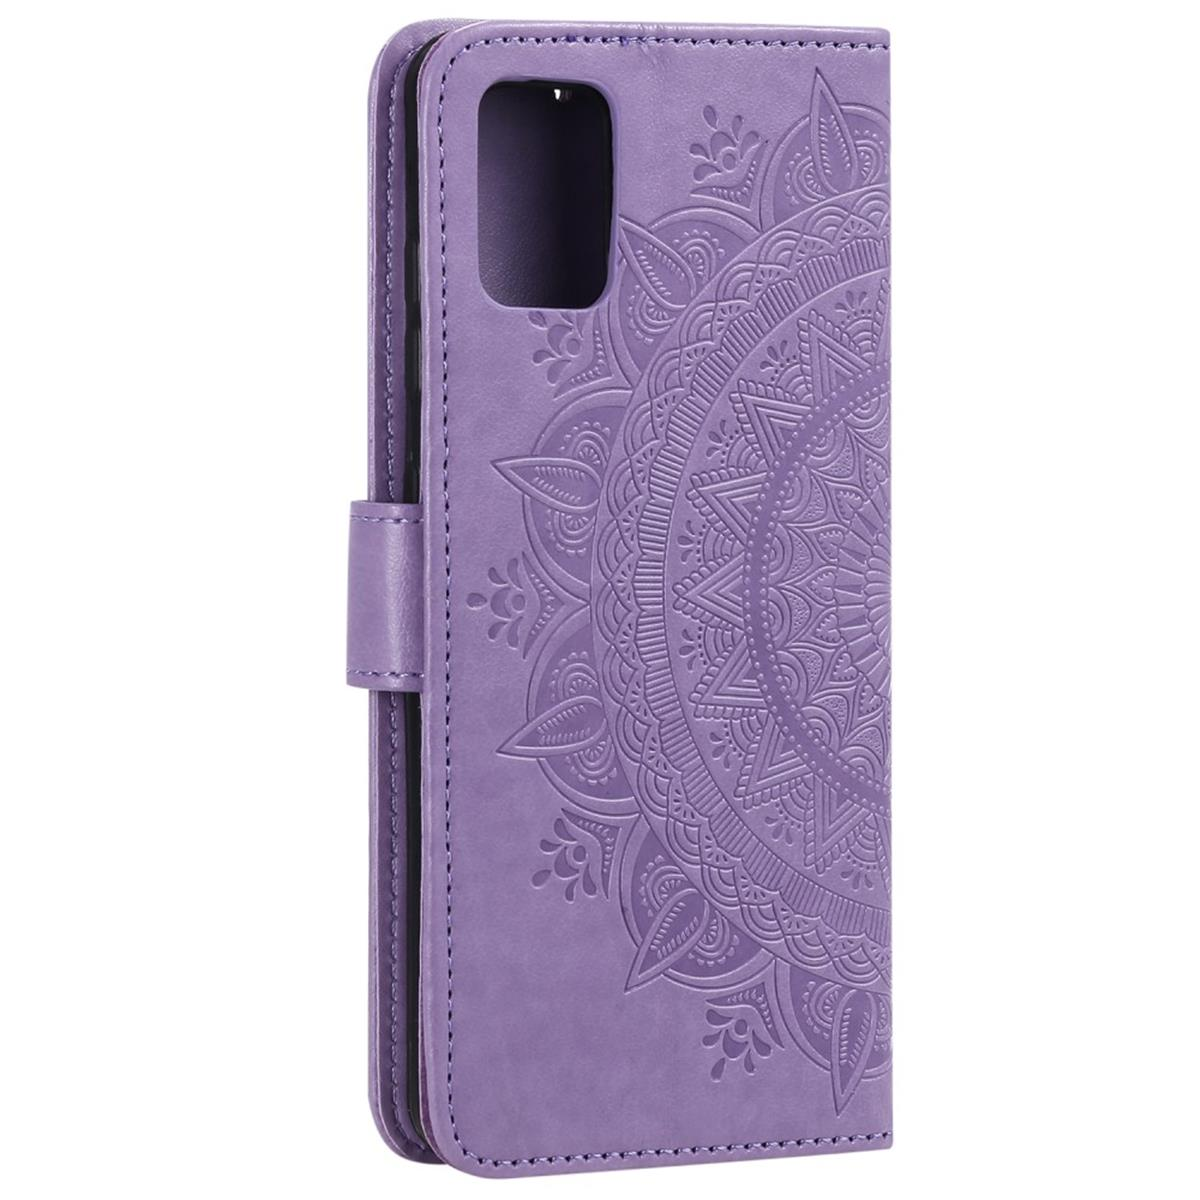 COVERKINGZ Klapphülle mit Mandala Samsung, Lila Muster, A51, Galaxy Bookcover